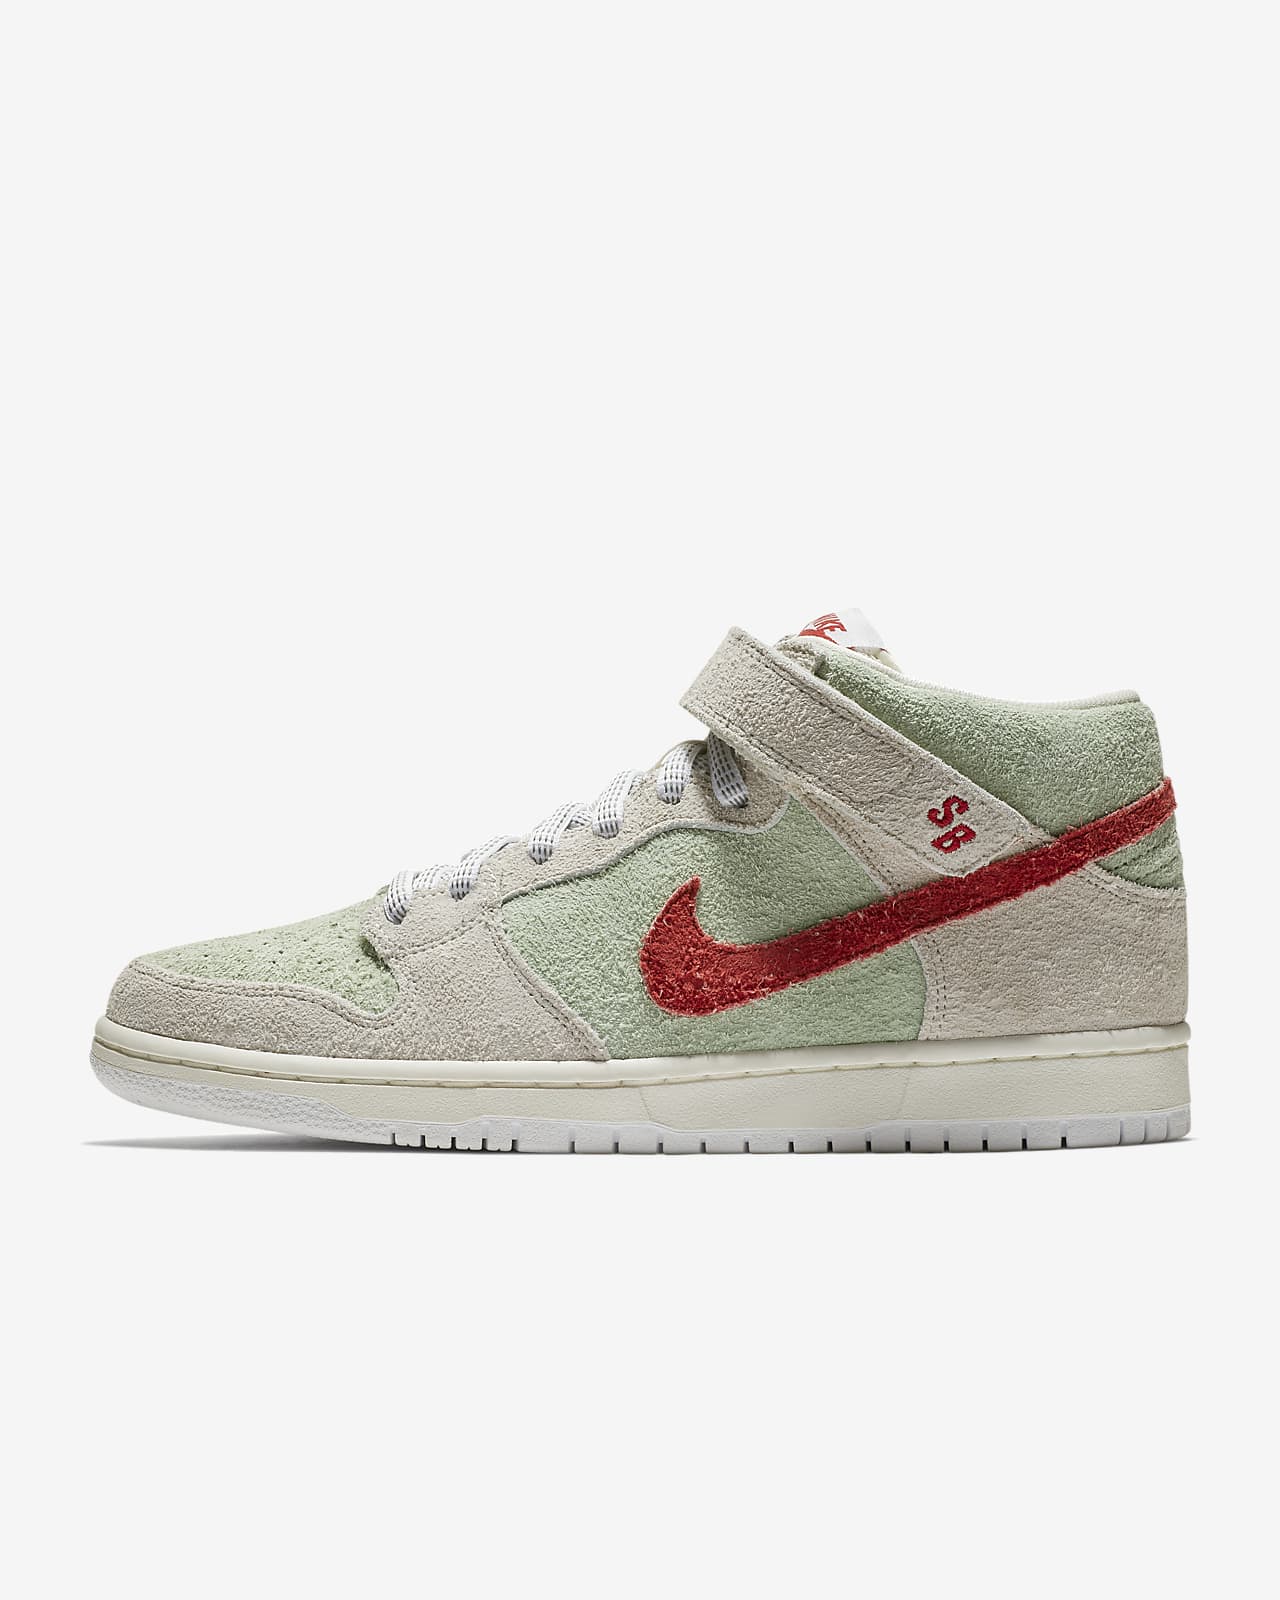 how had is it to get on nike sb dunks